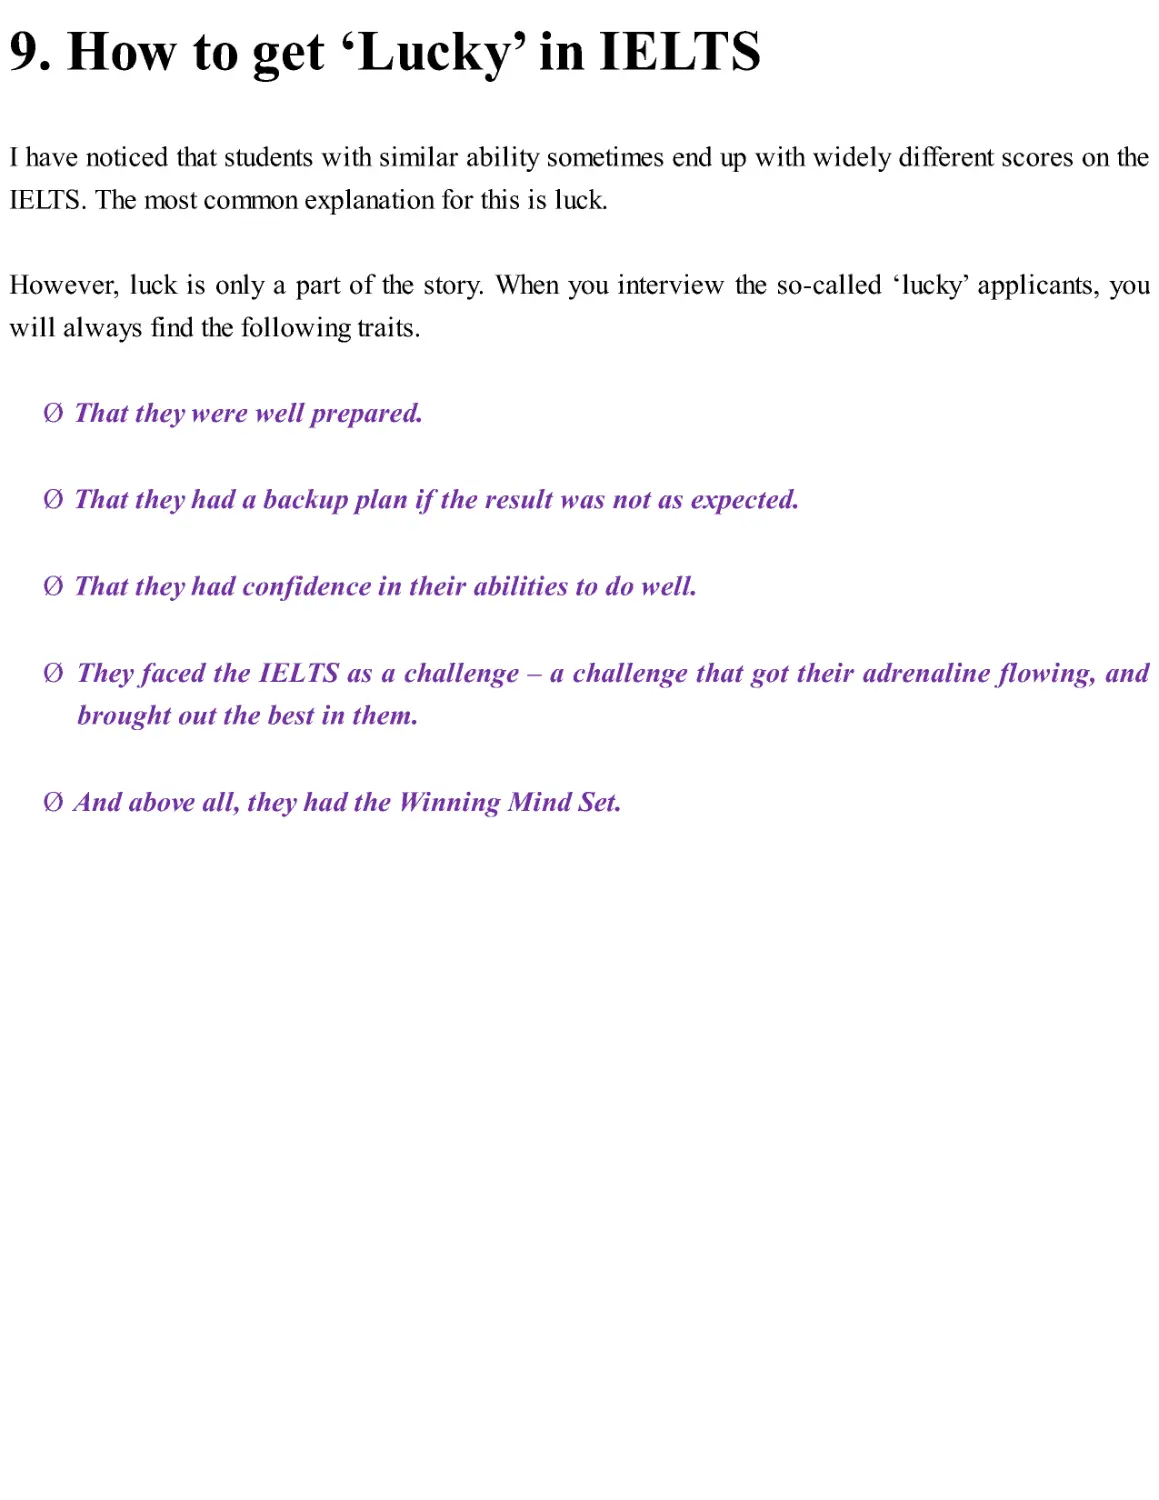 9. How to get ‘Lucky’ in IELTS